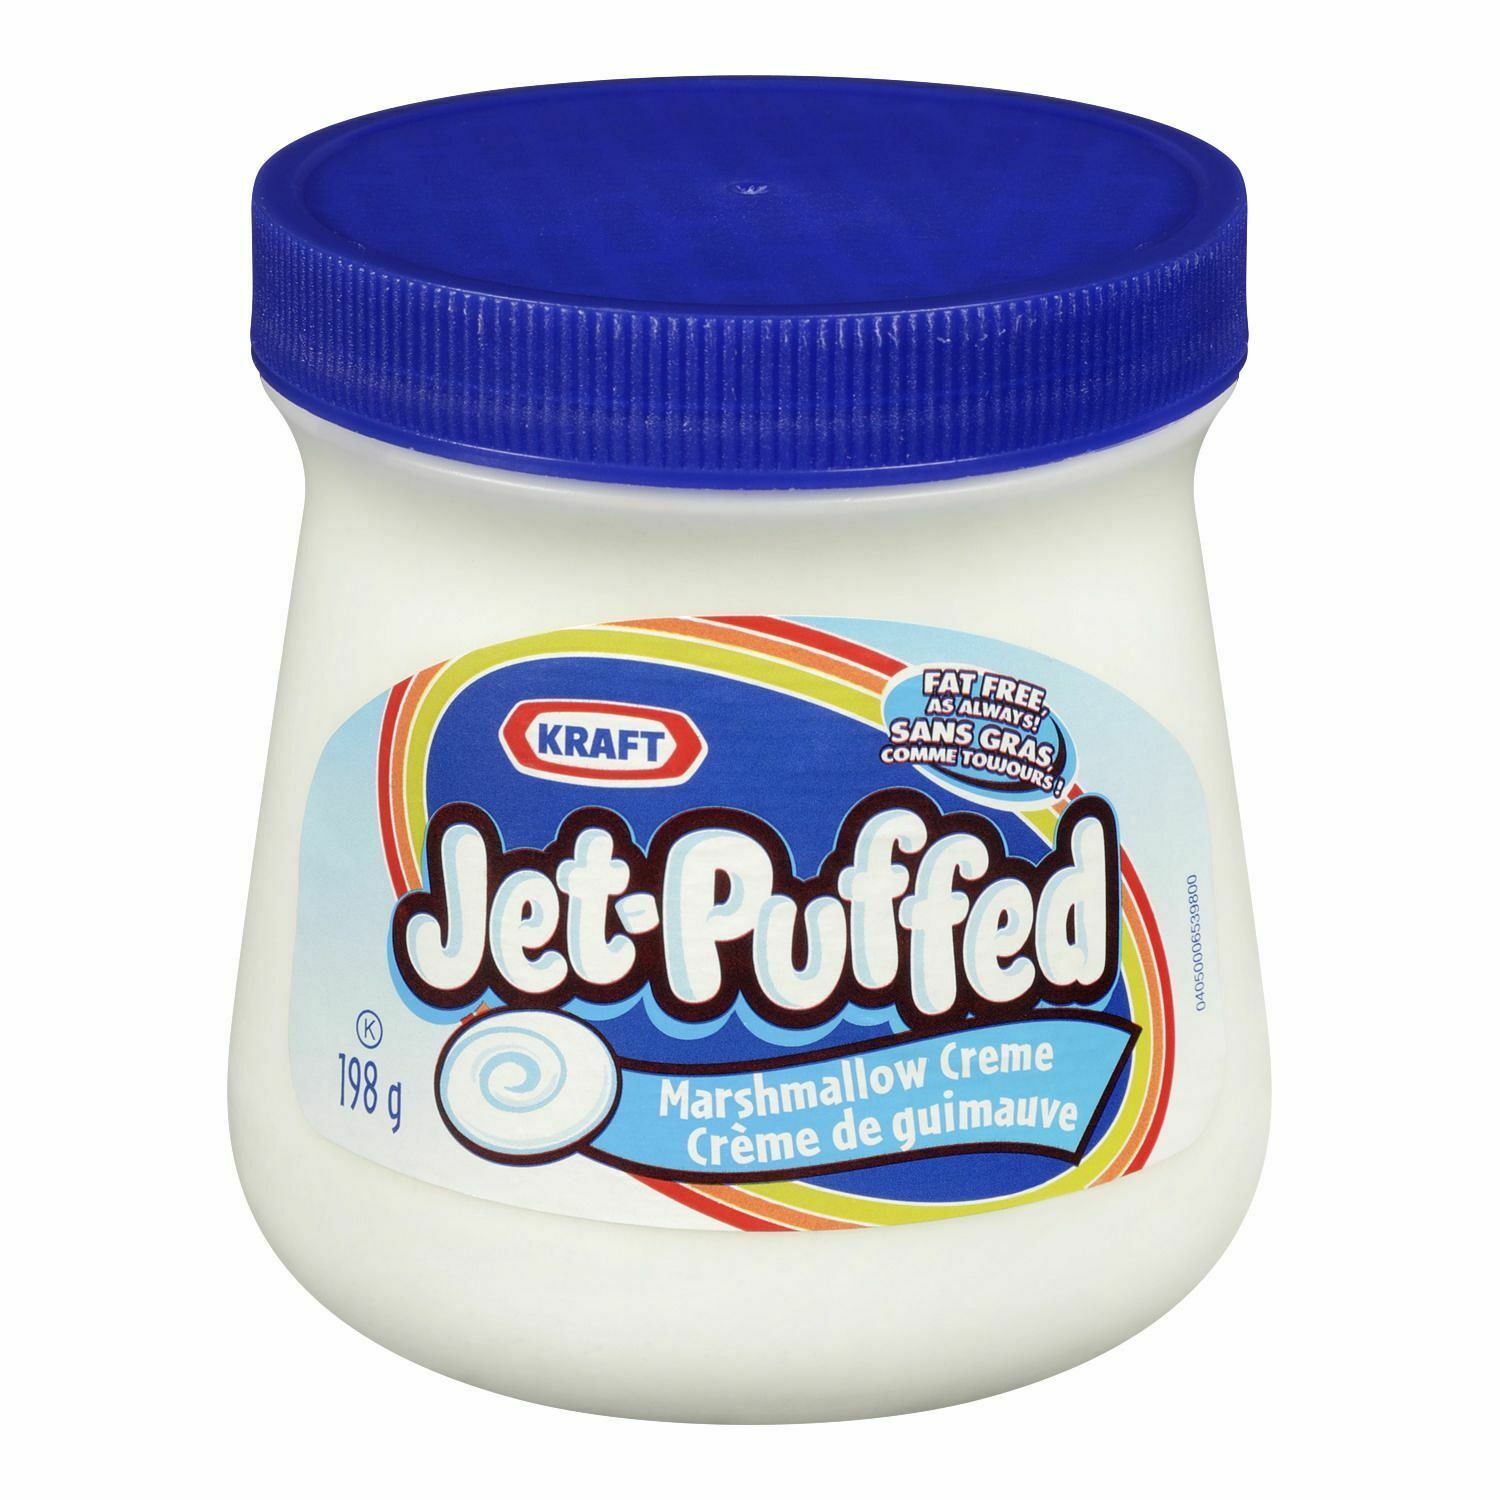 6x Pack Kraft Jet-Puffed Marshmallow Creme 198g/ 7oz Each -From Canada -FRE...